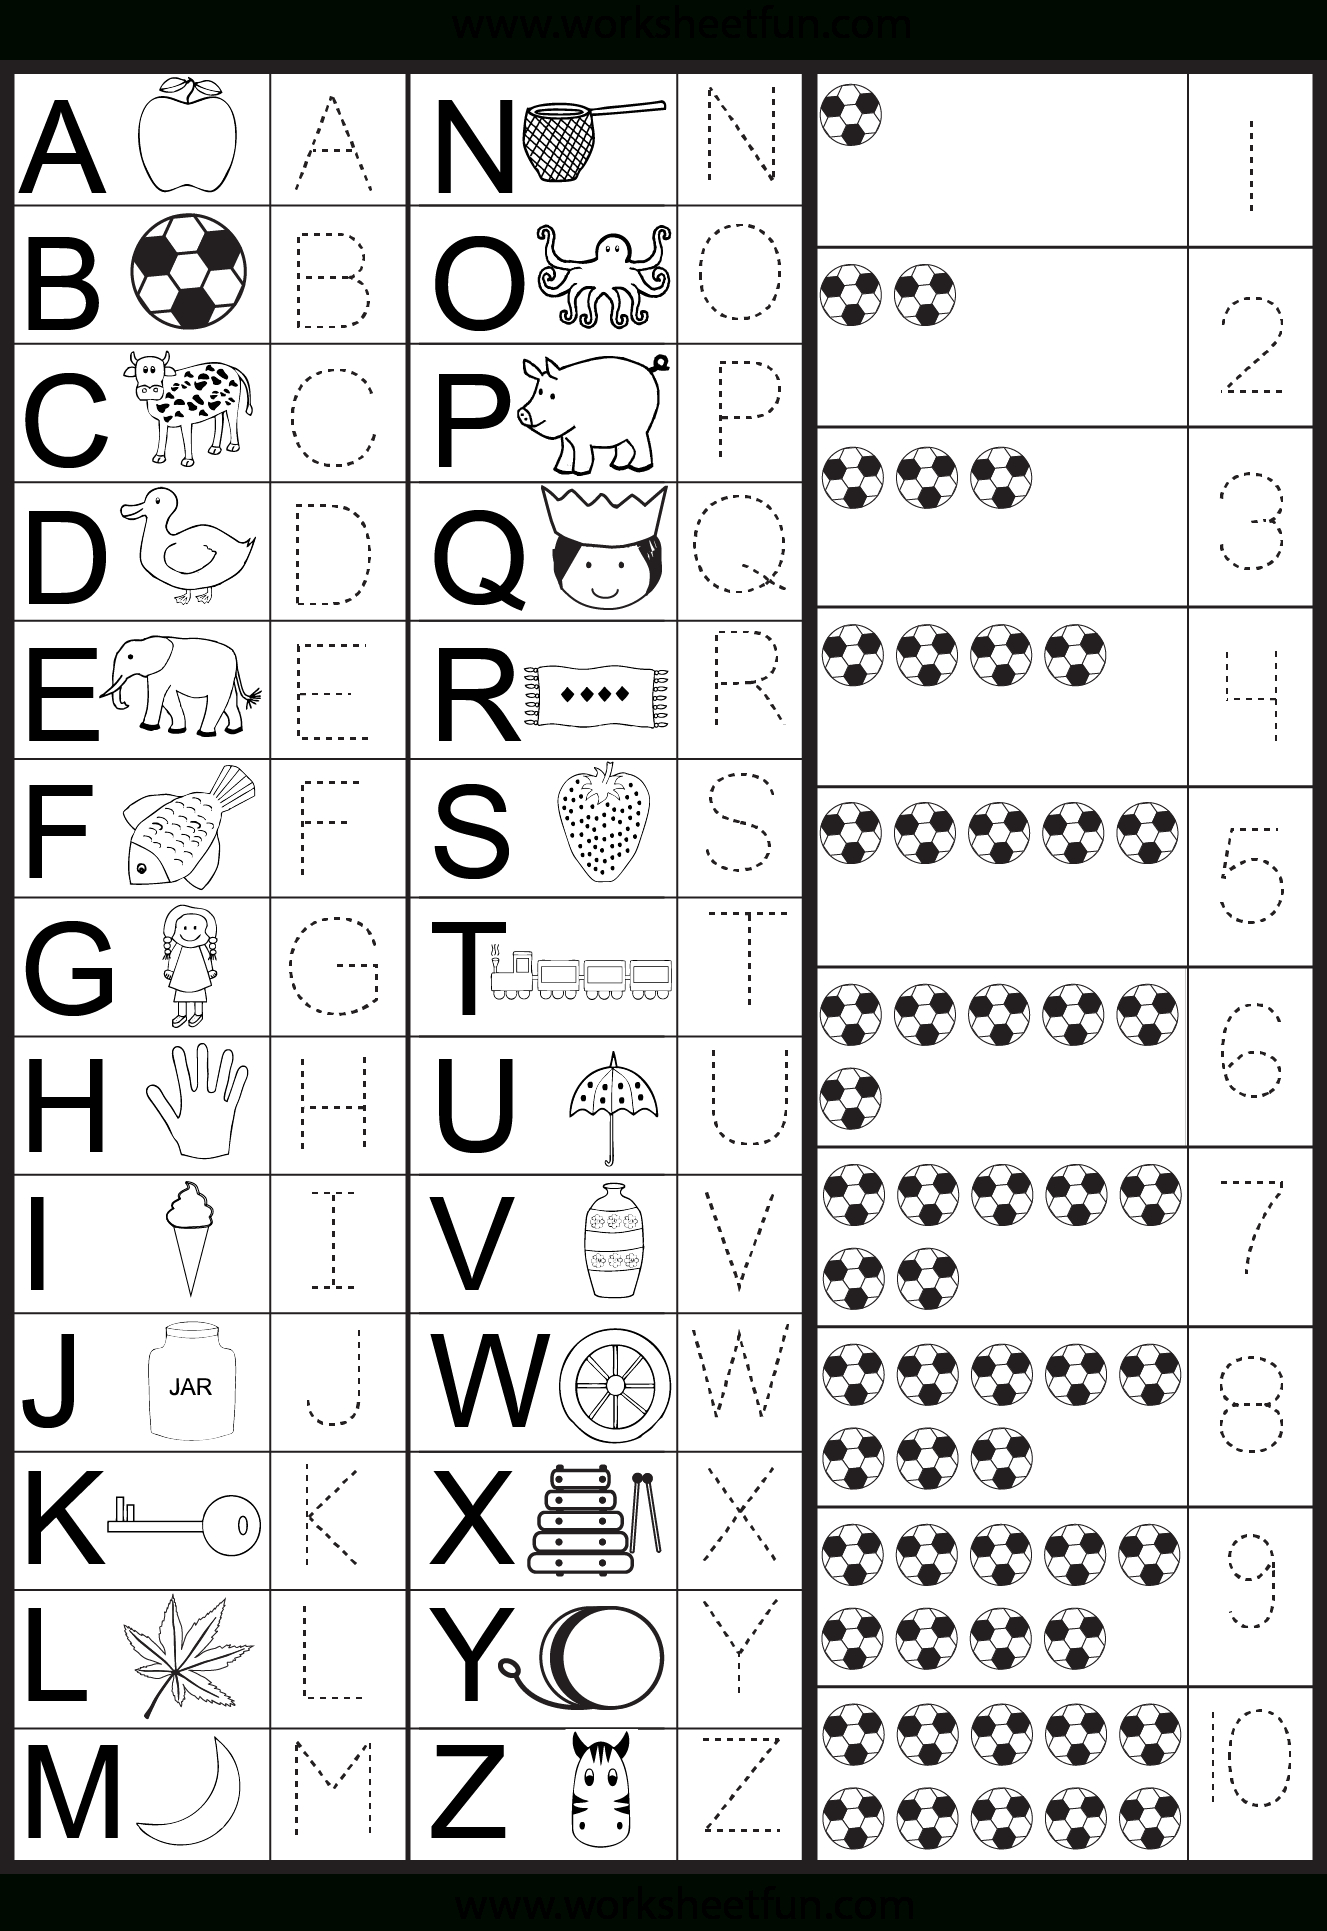 Free Tracing Ketters And Numbers | Letters And Numbers pertaining to Free Tracing Letters And Numbers For Preschoolers